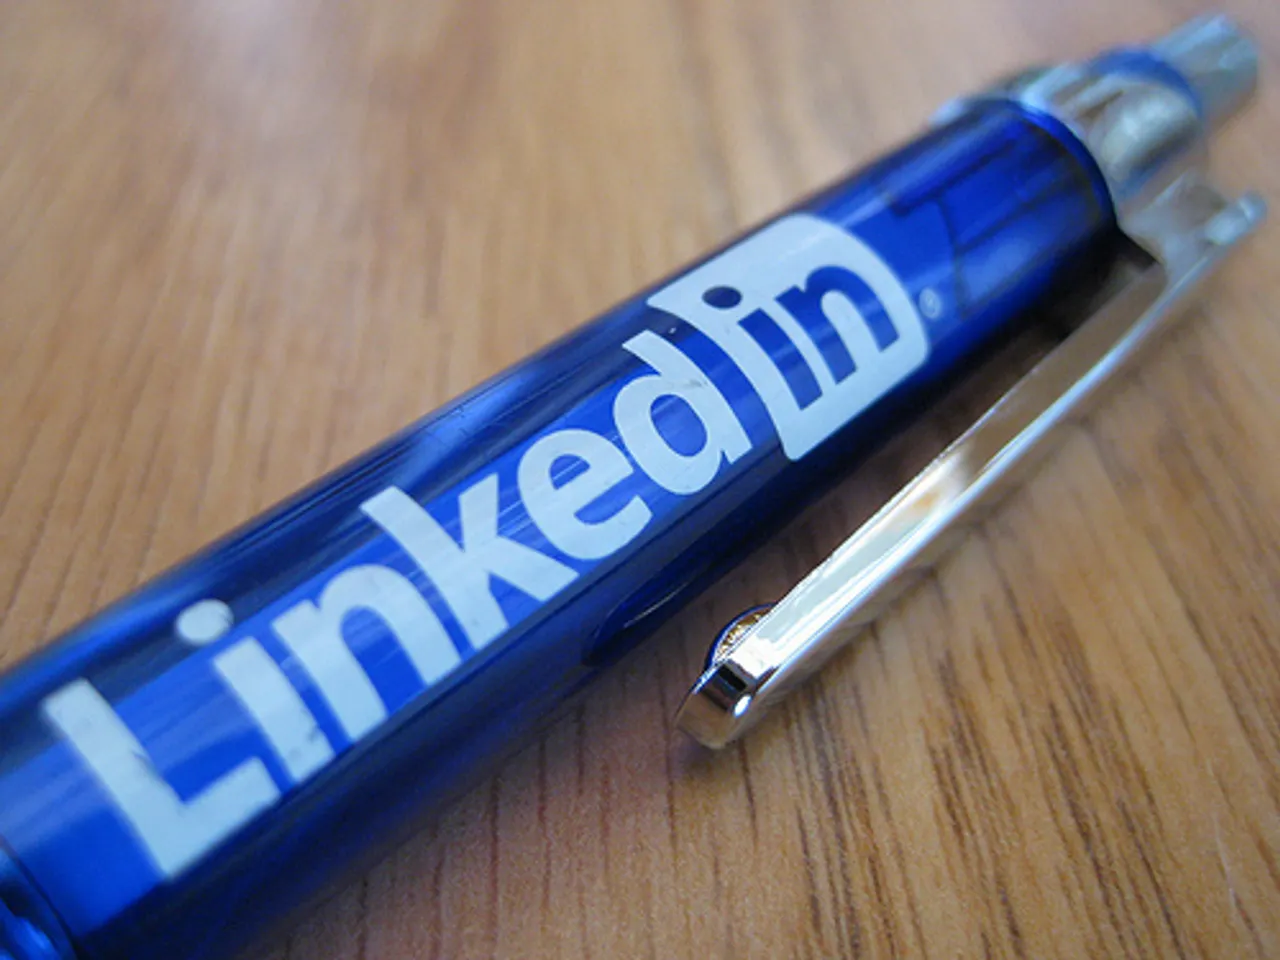 How Should Brands Capitalize Their Presence on Linkedin?